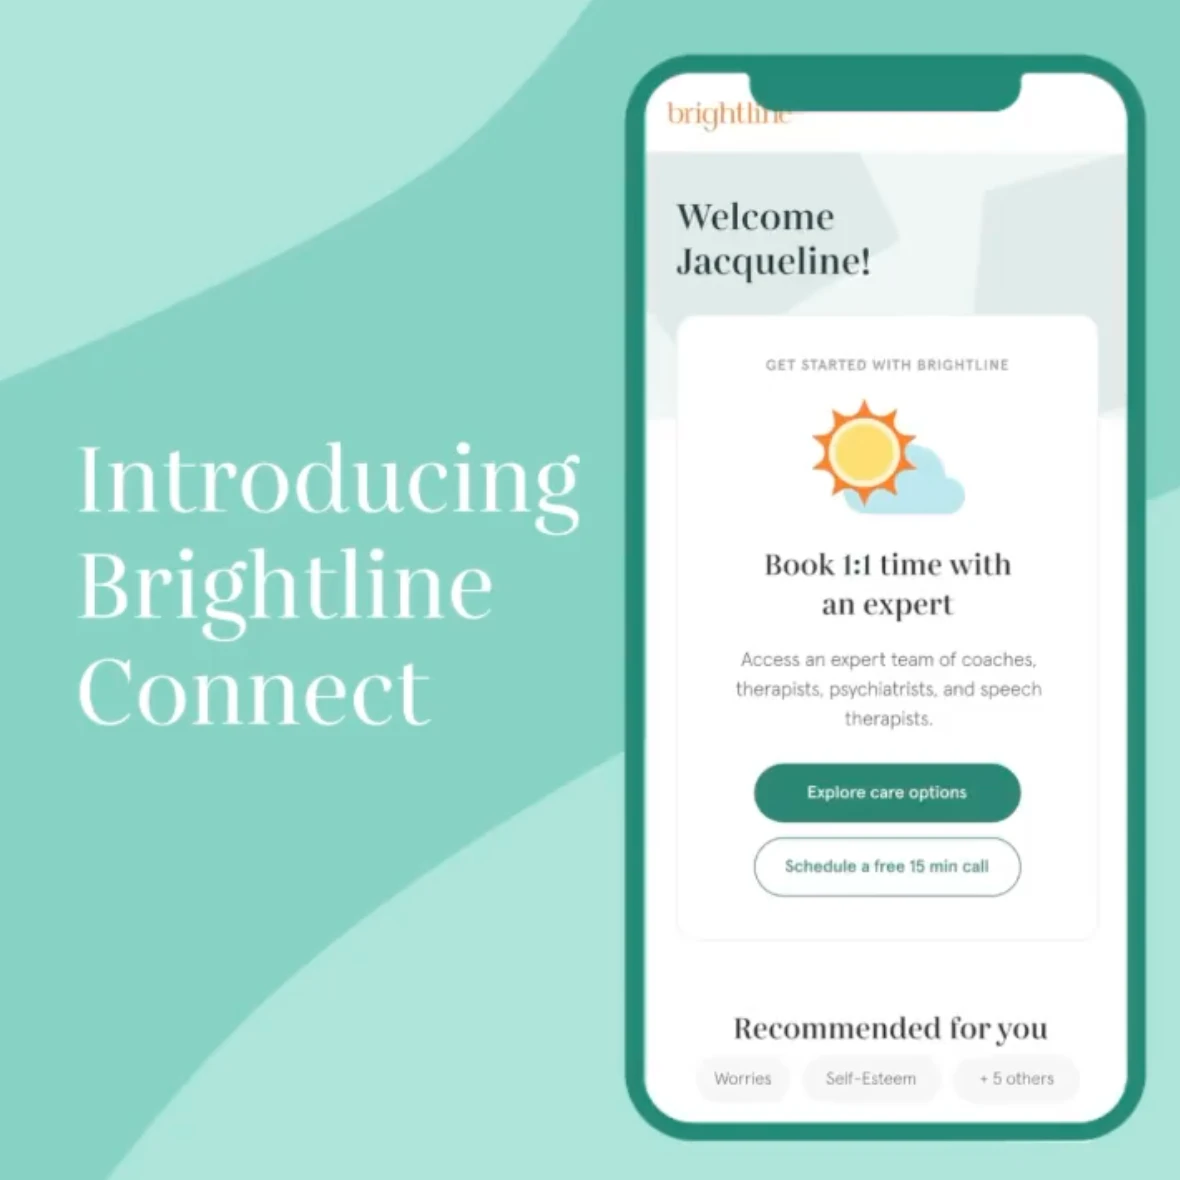 Introducing Brightline Connect, with an illustration of a phone with the Brightline app opened.